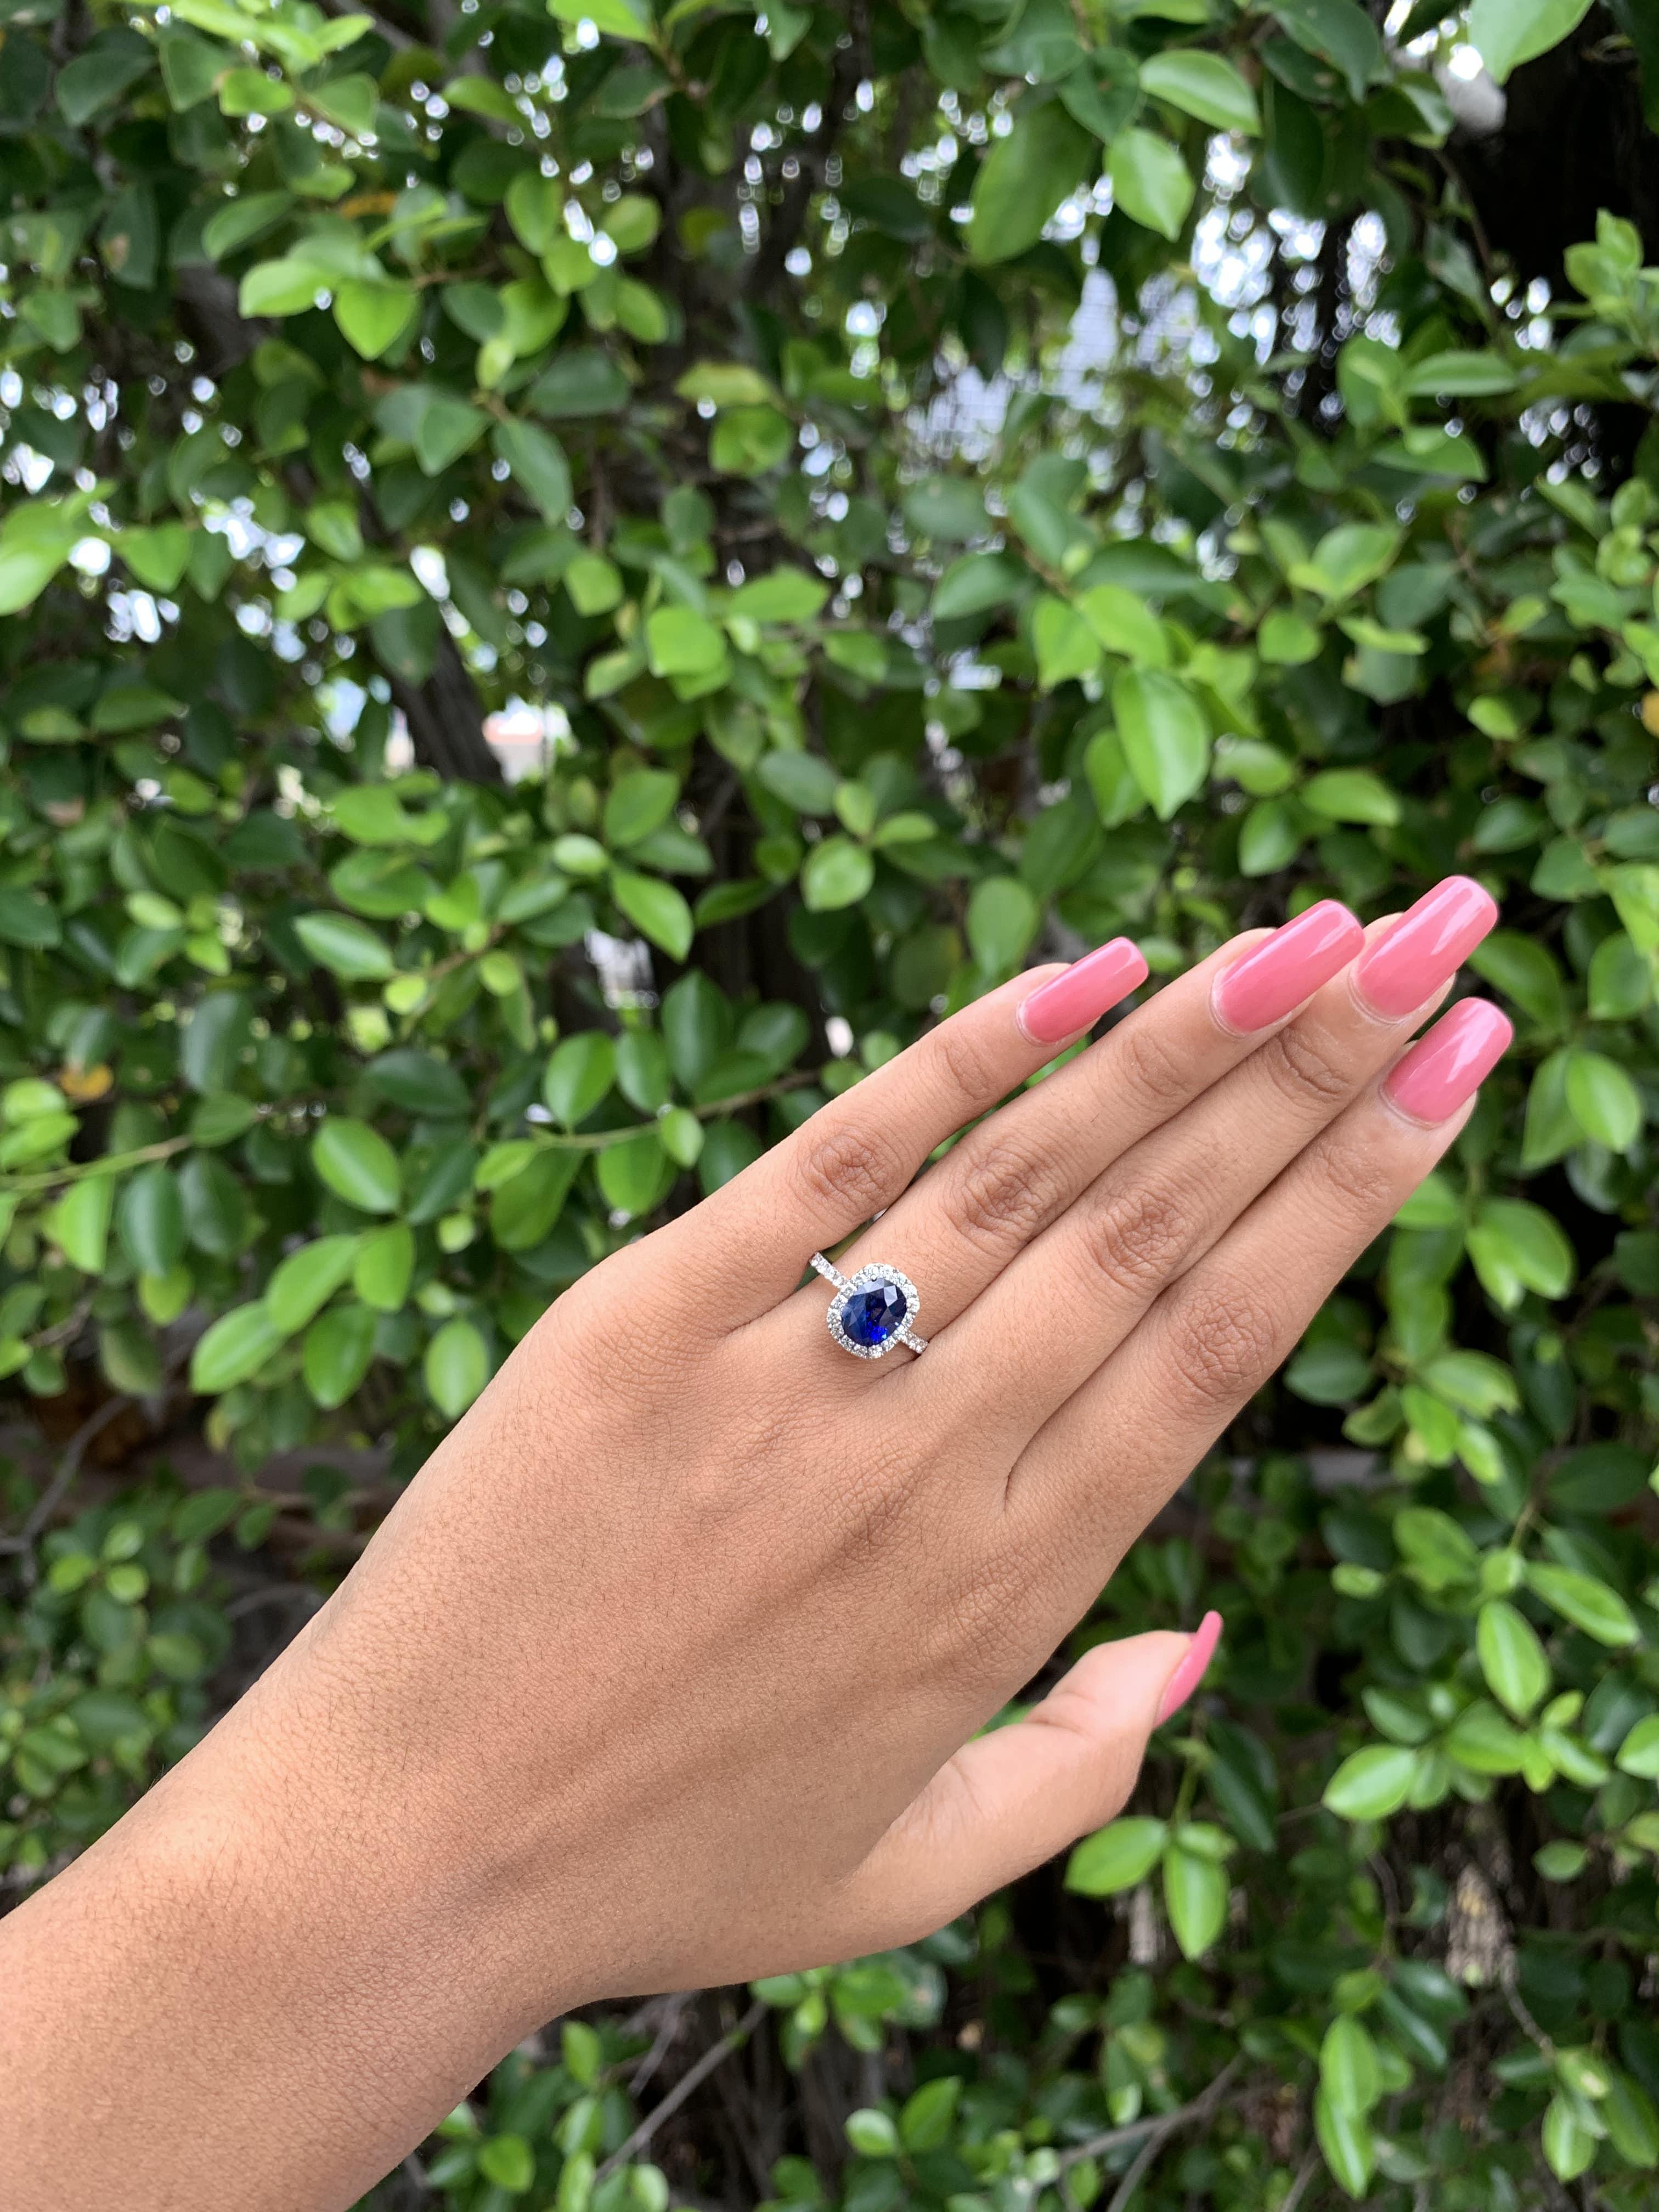 Radiating timeless elegance, this extraordinary piece has been specially designed to accentuate the mesmerizing beauty of this mesmerizing royal blue sapphire.

The sapphire, a regal emblem of rich sophistication, boasts a captivating royal blue hue